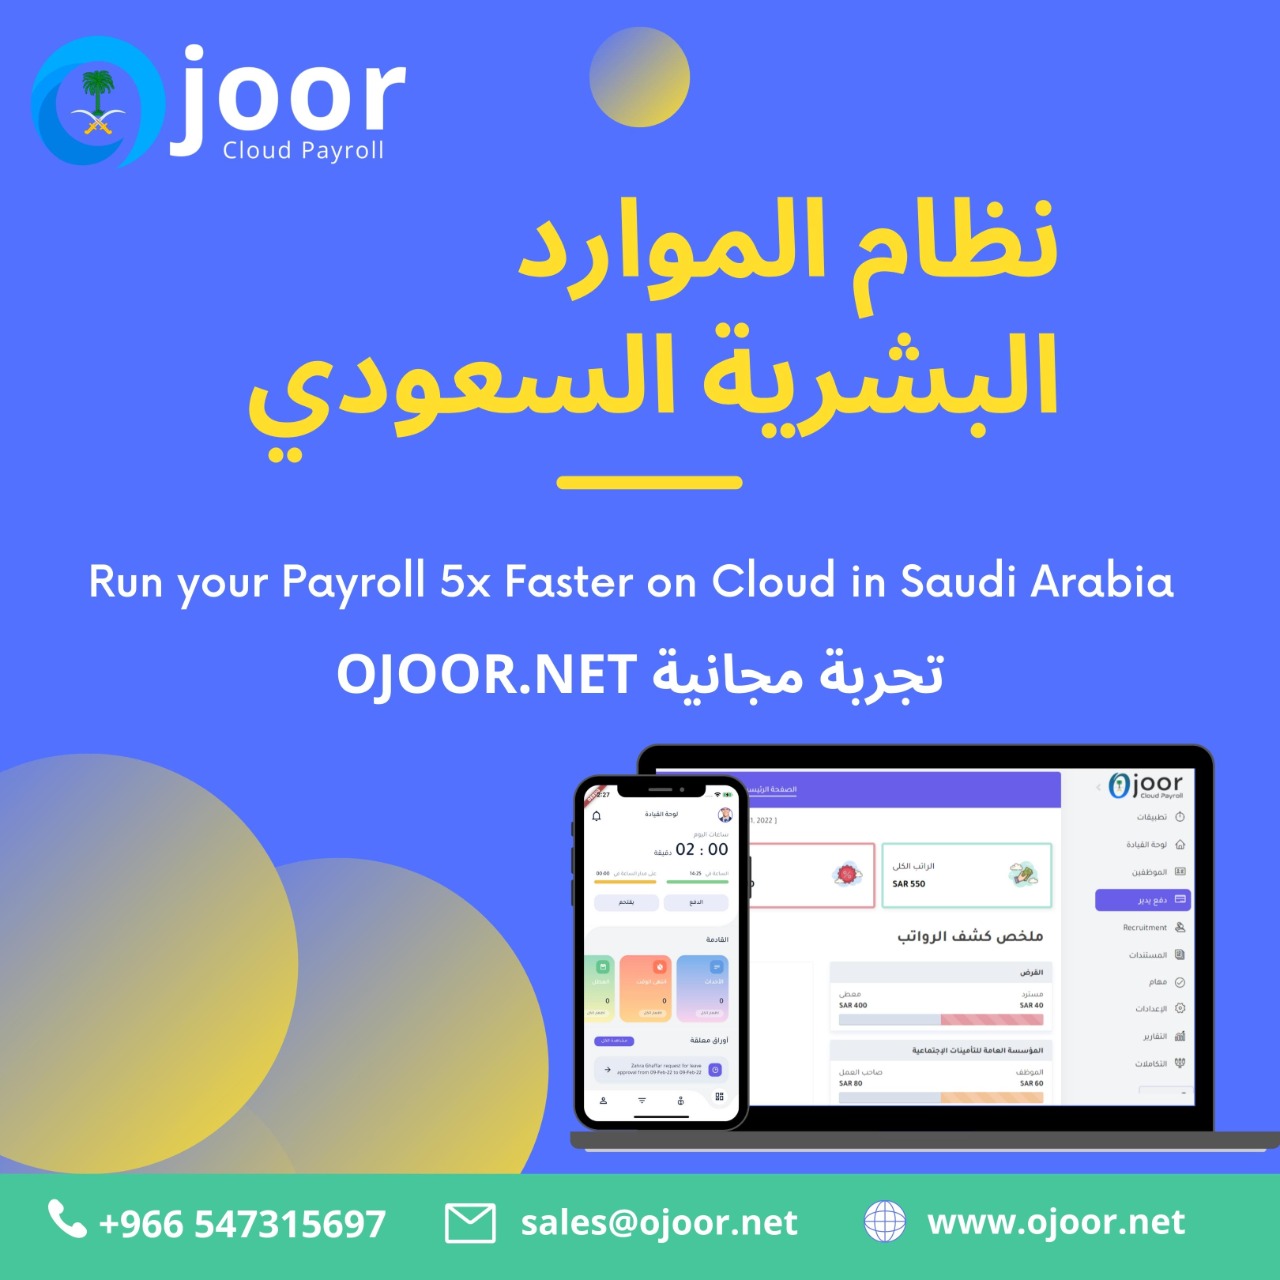 What features should look for in Payroll Software in Saudi Arabia?